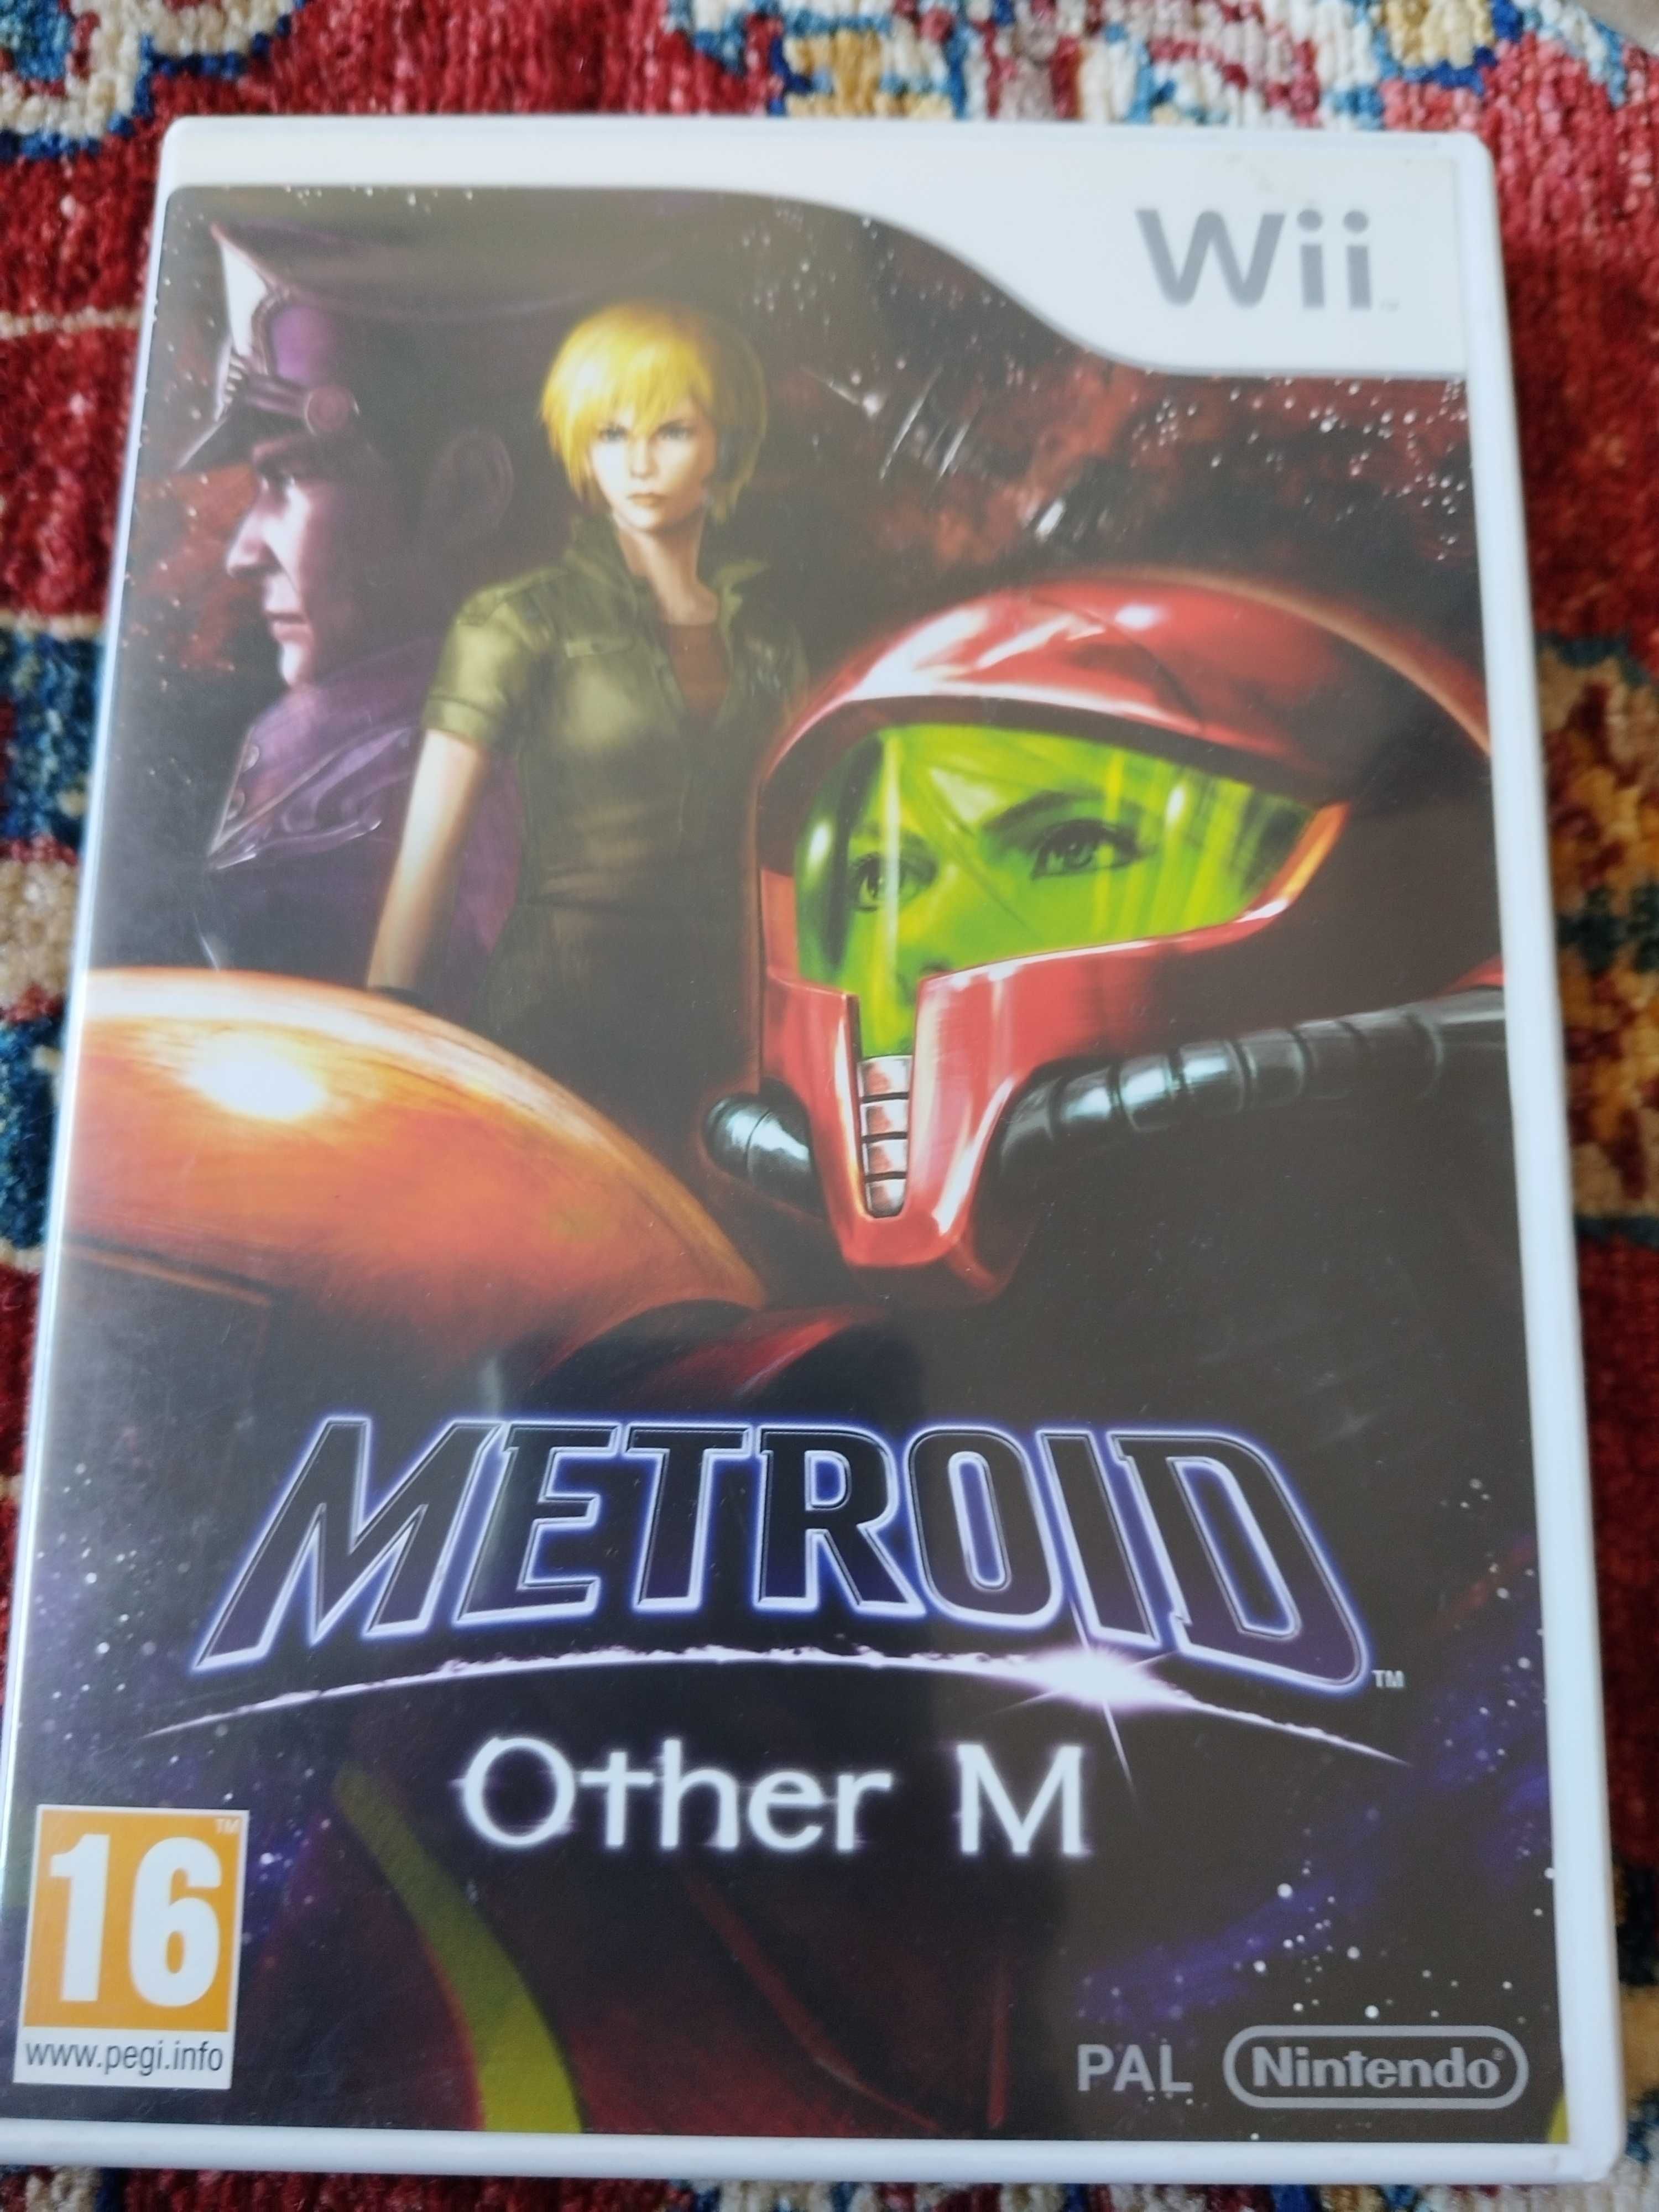 WII Metroid Other M